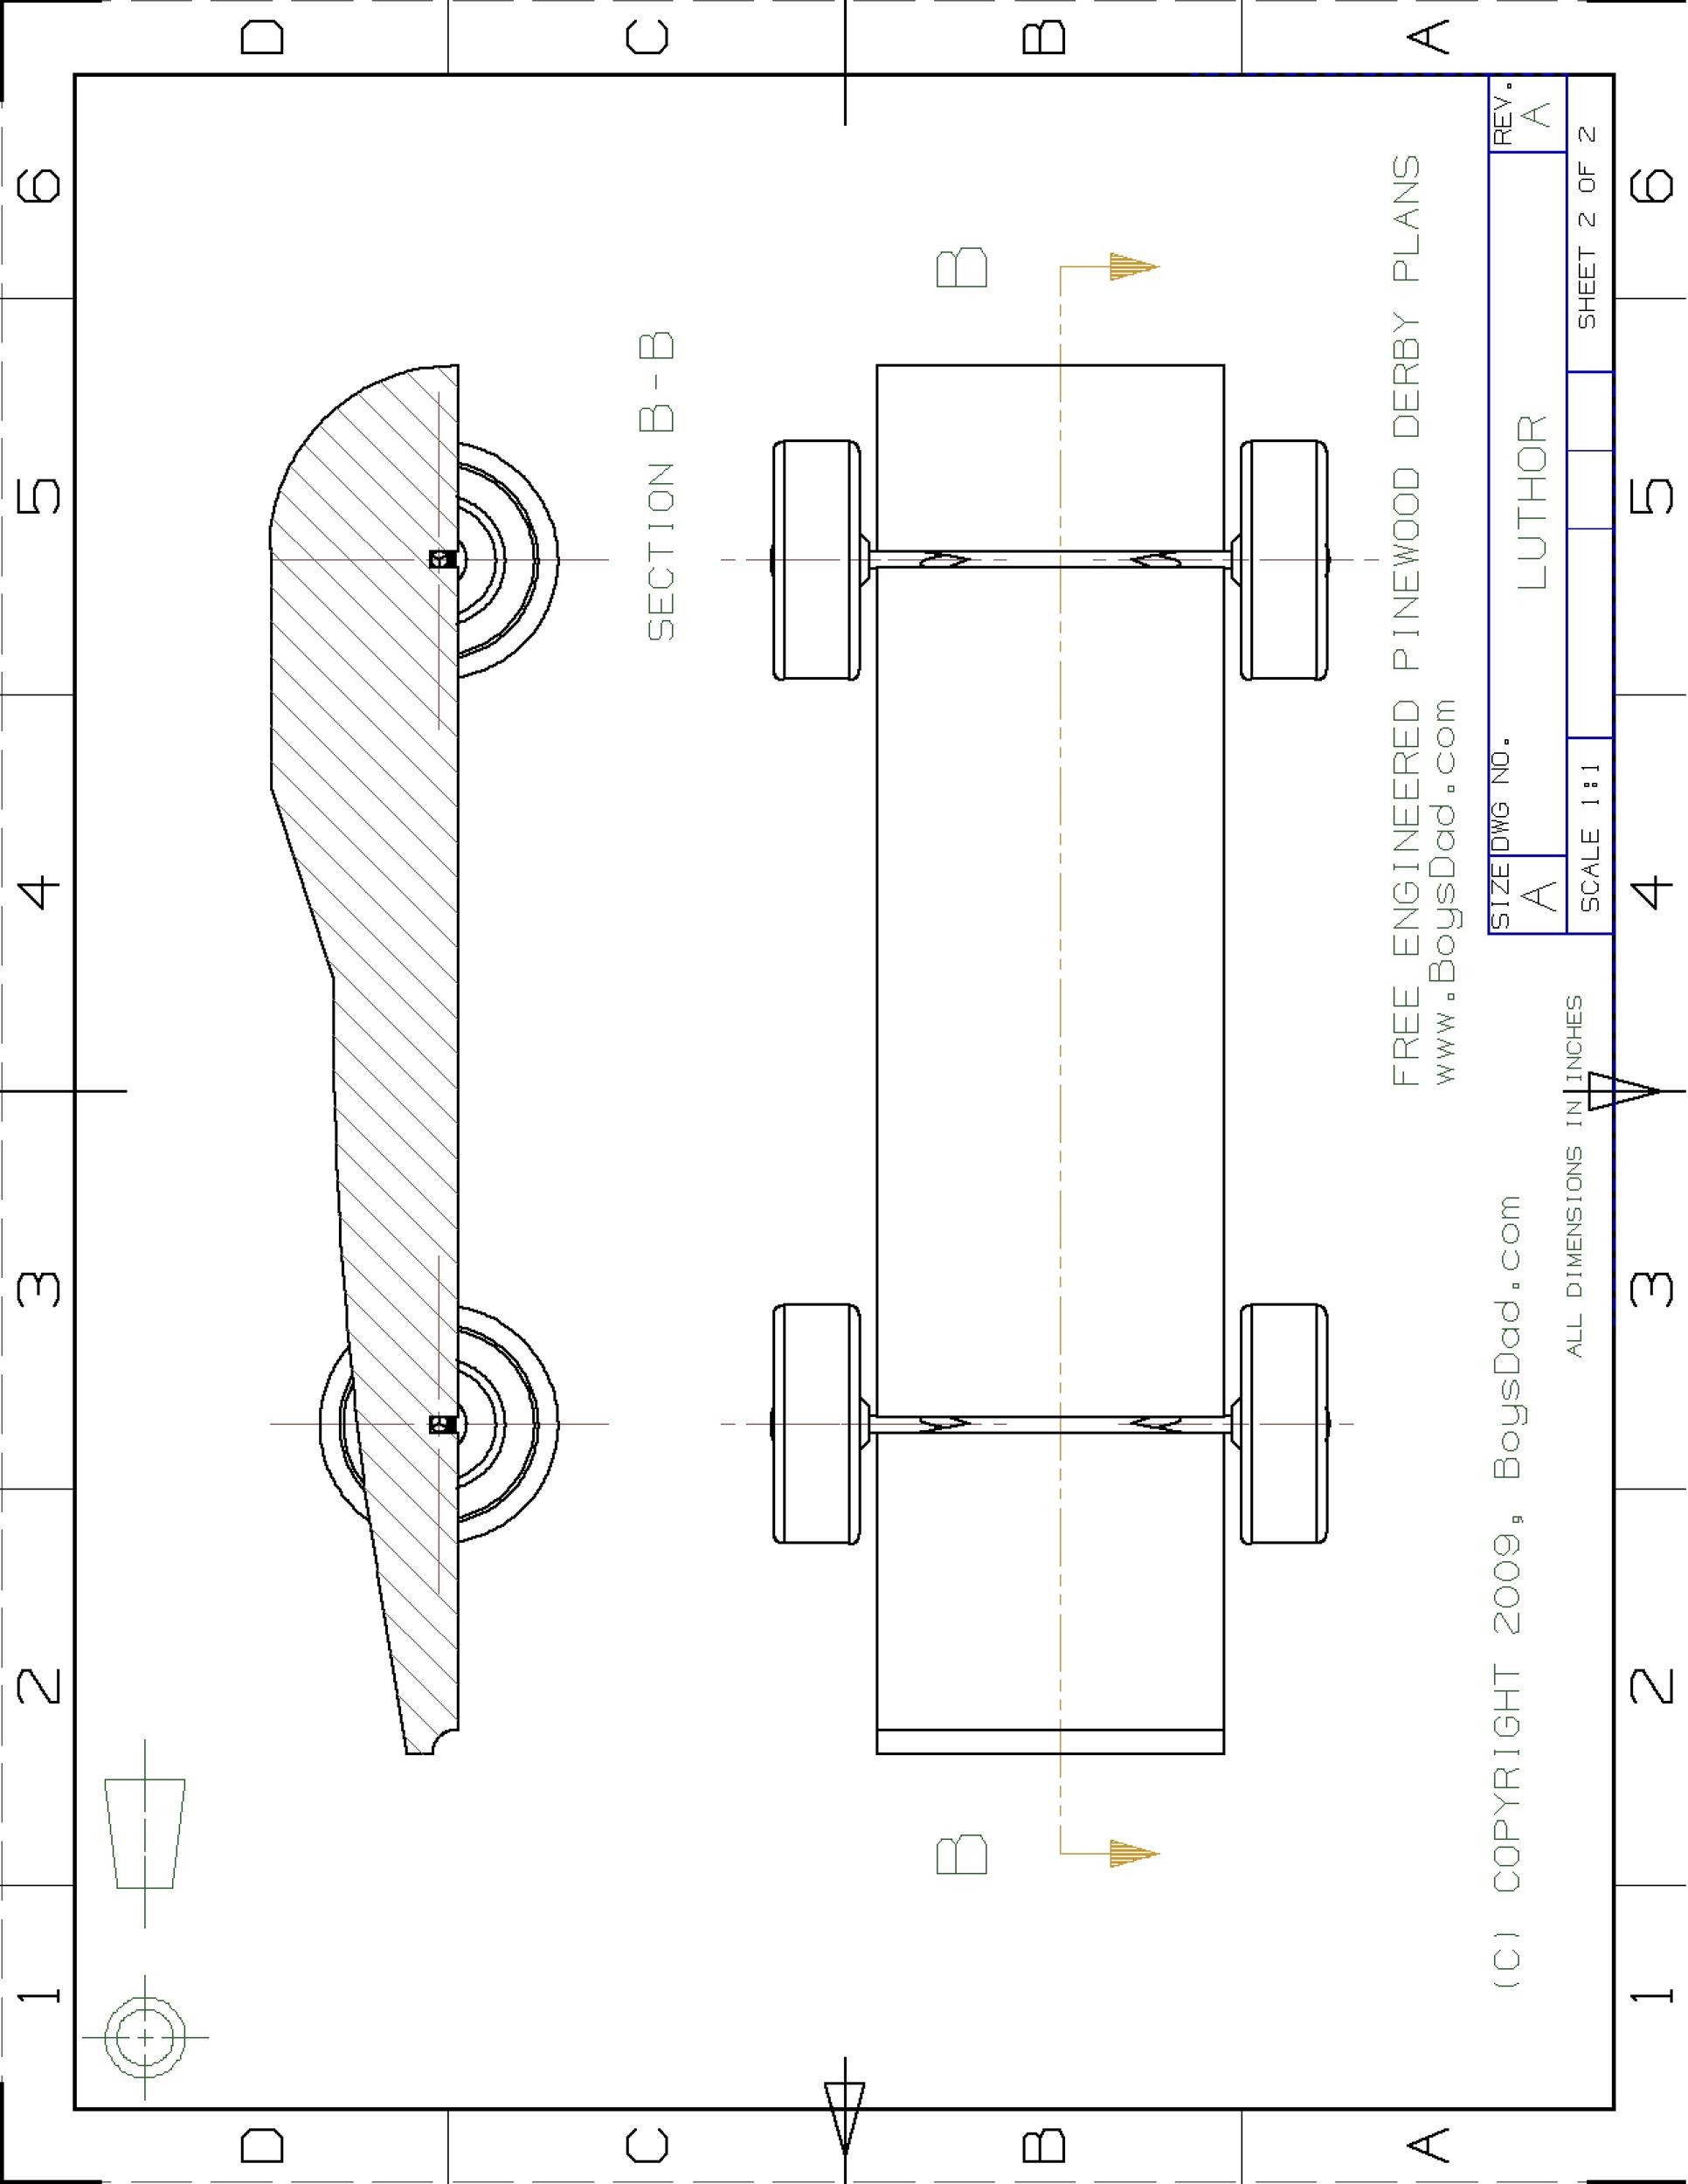 39 Awesome Pinewood Derby Car Designs Templates ᐅ TemplateLab Image